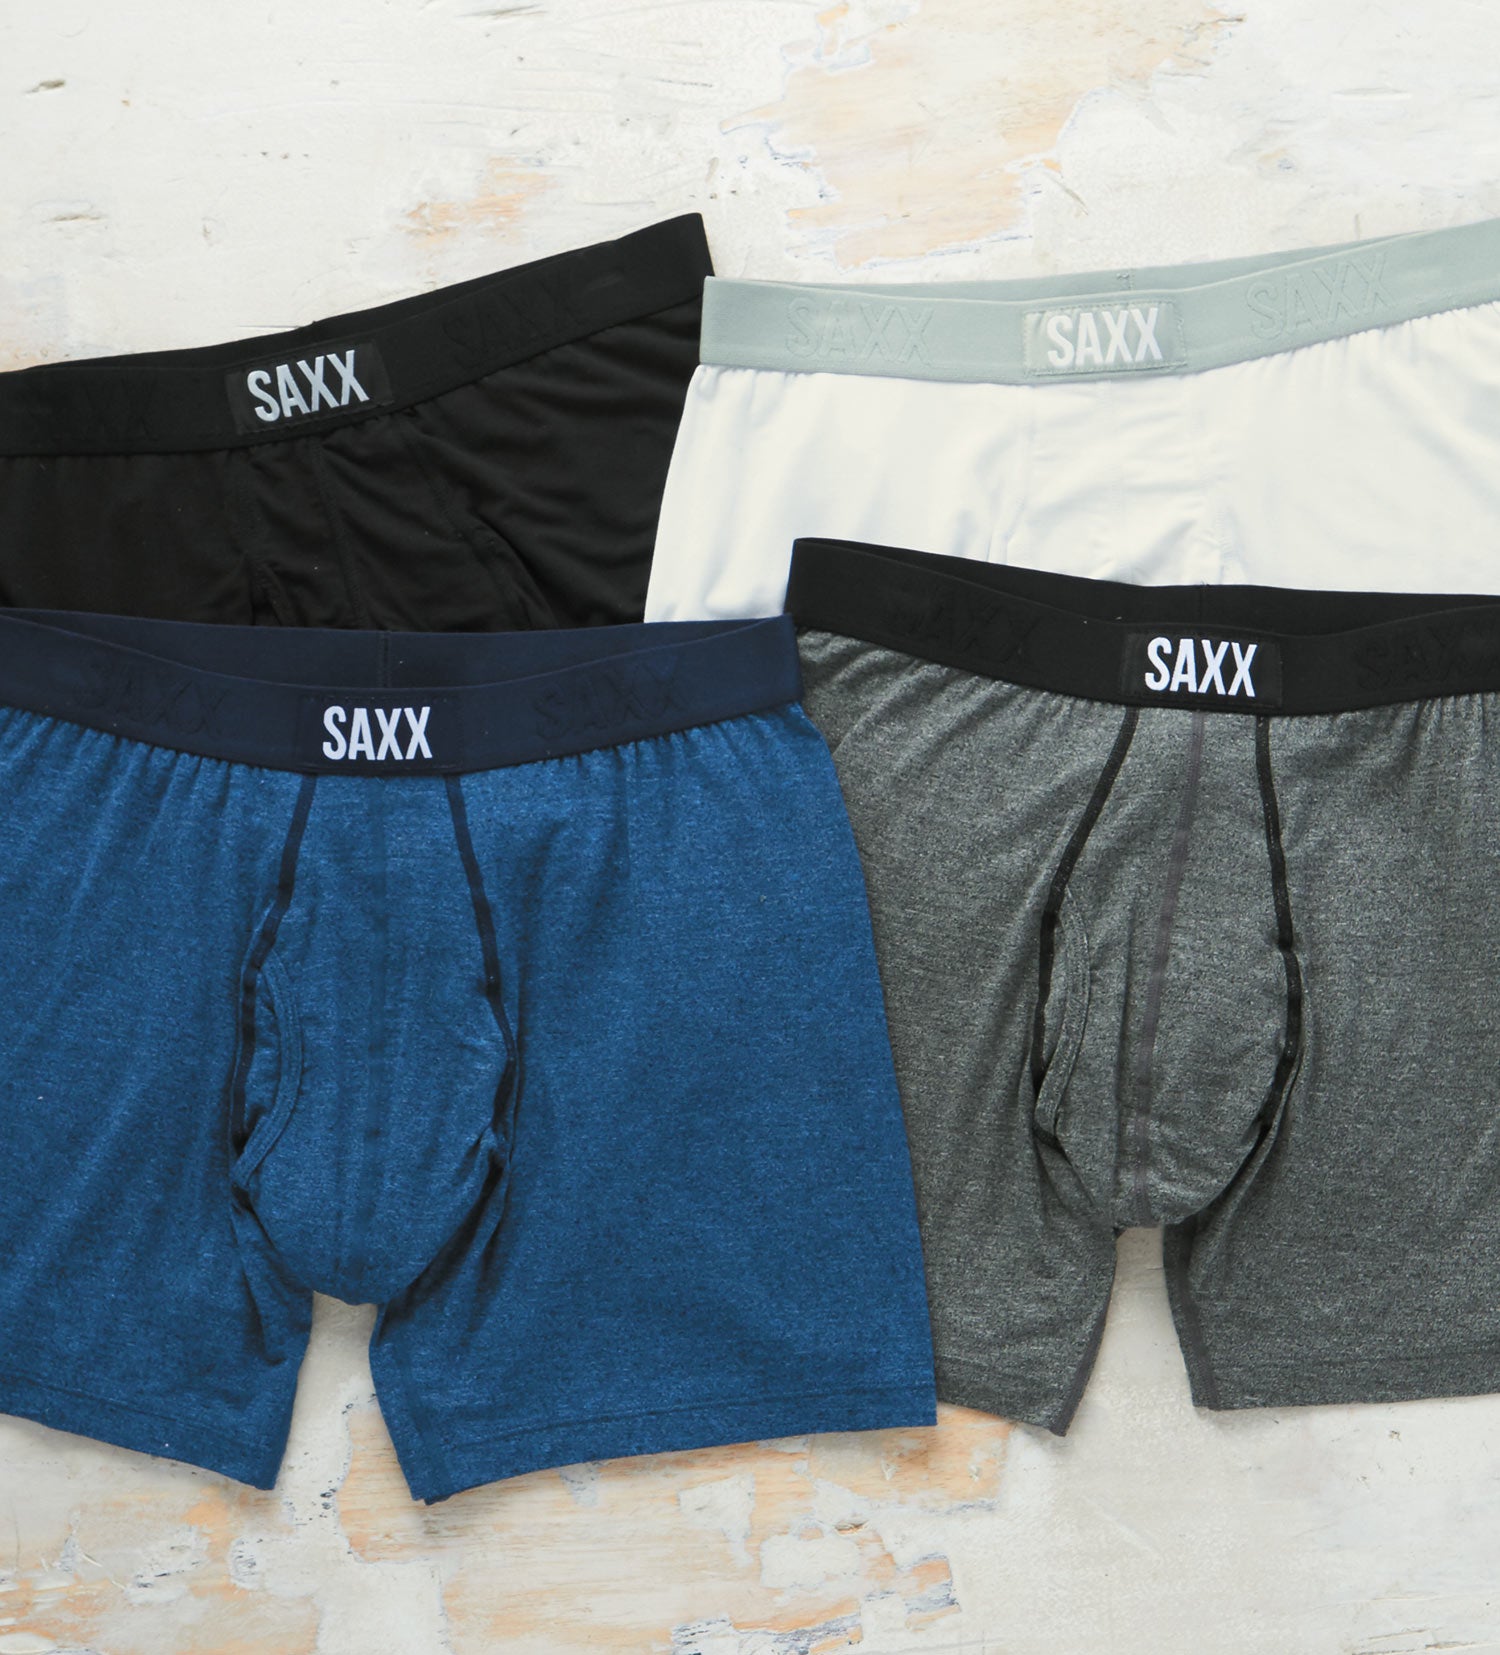 Saxx Men's Underwear - Ultra Super Soft Briefs with Fly and Built